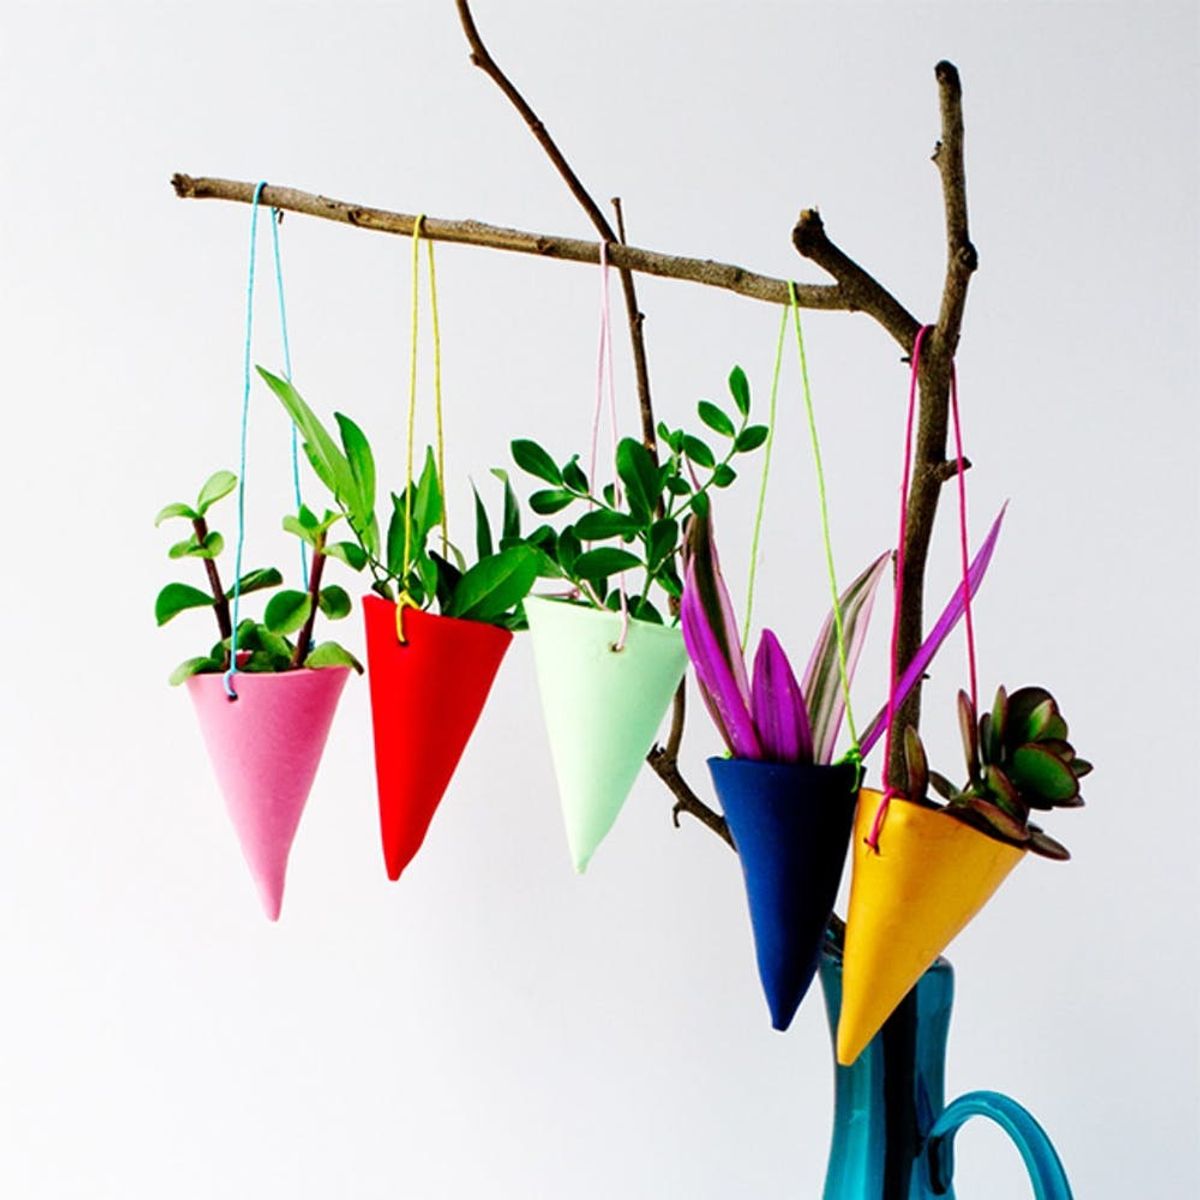 Let’s Hang Out: 17 Hanging Planters to Buy or DIY